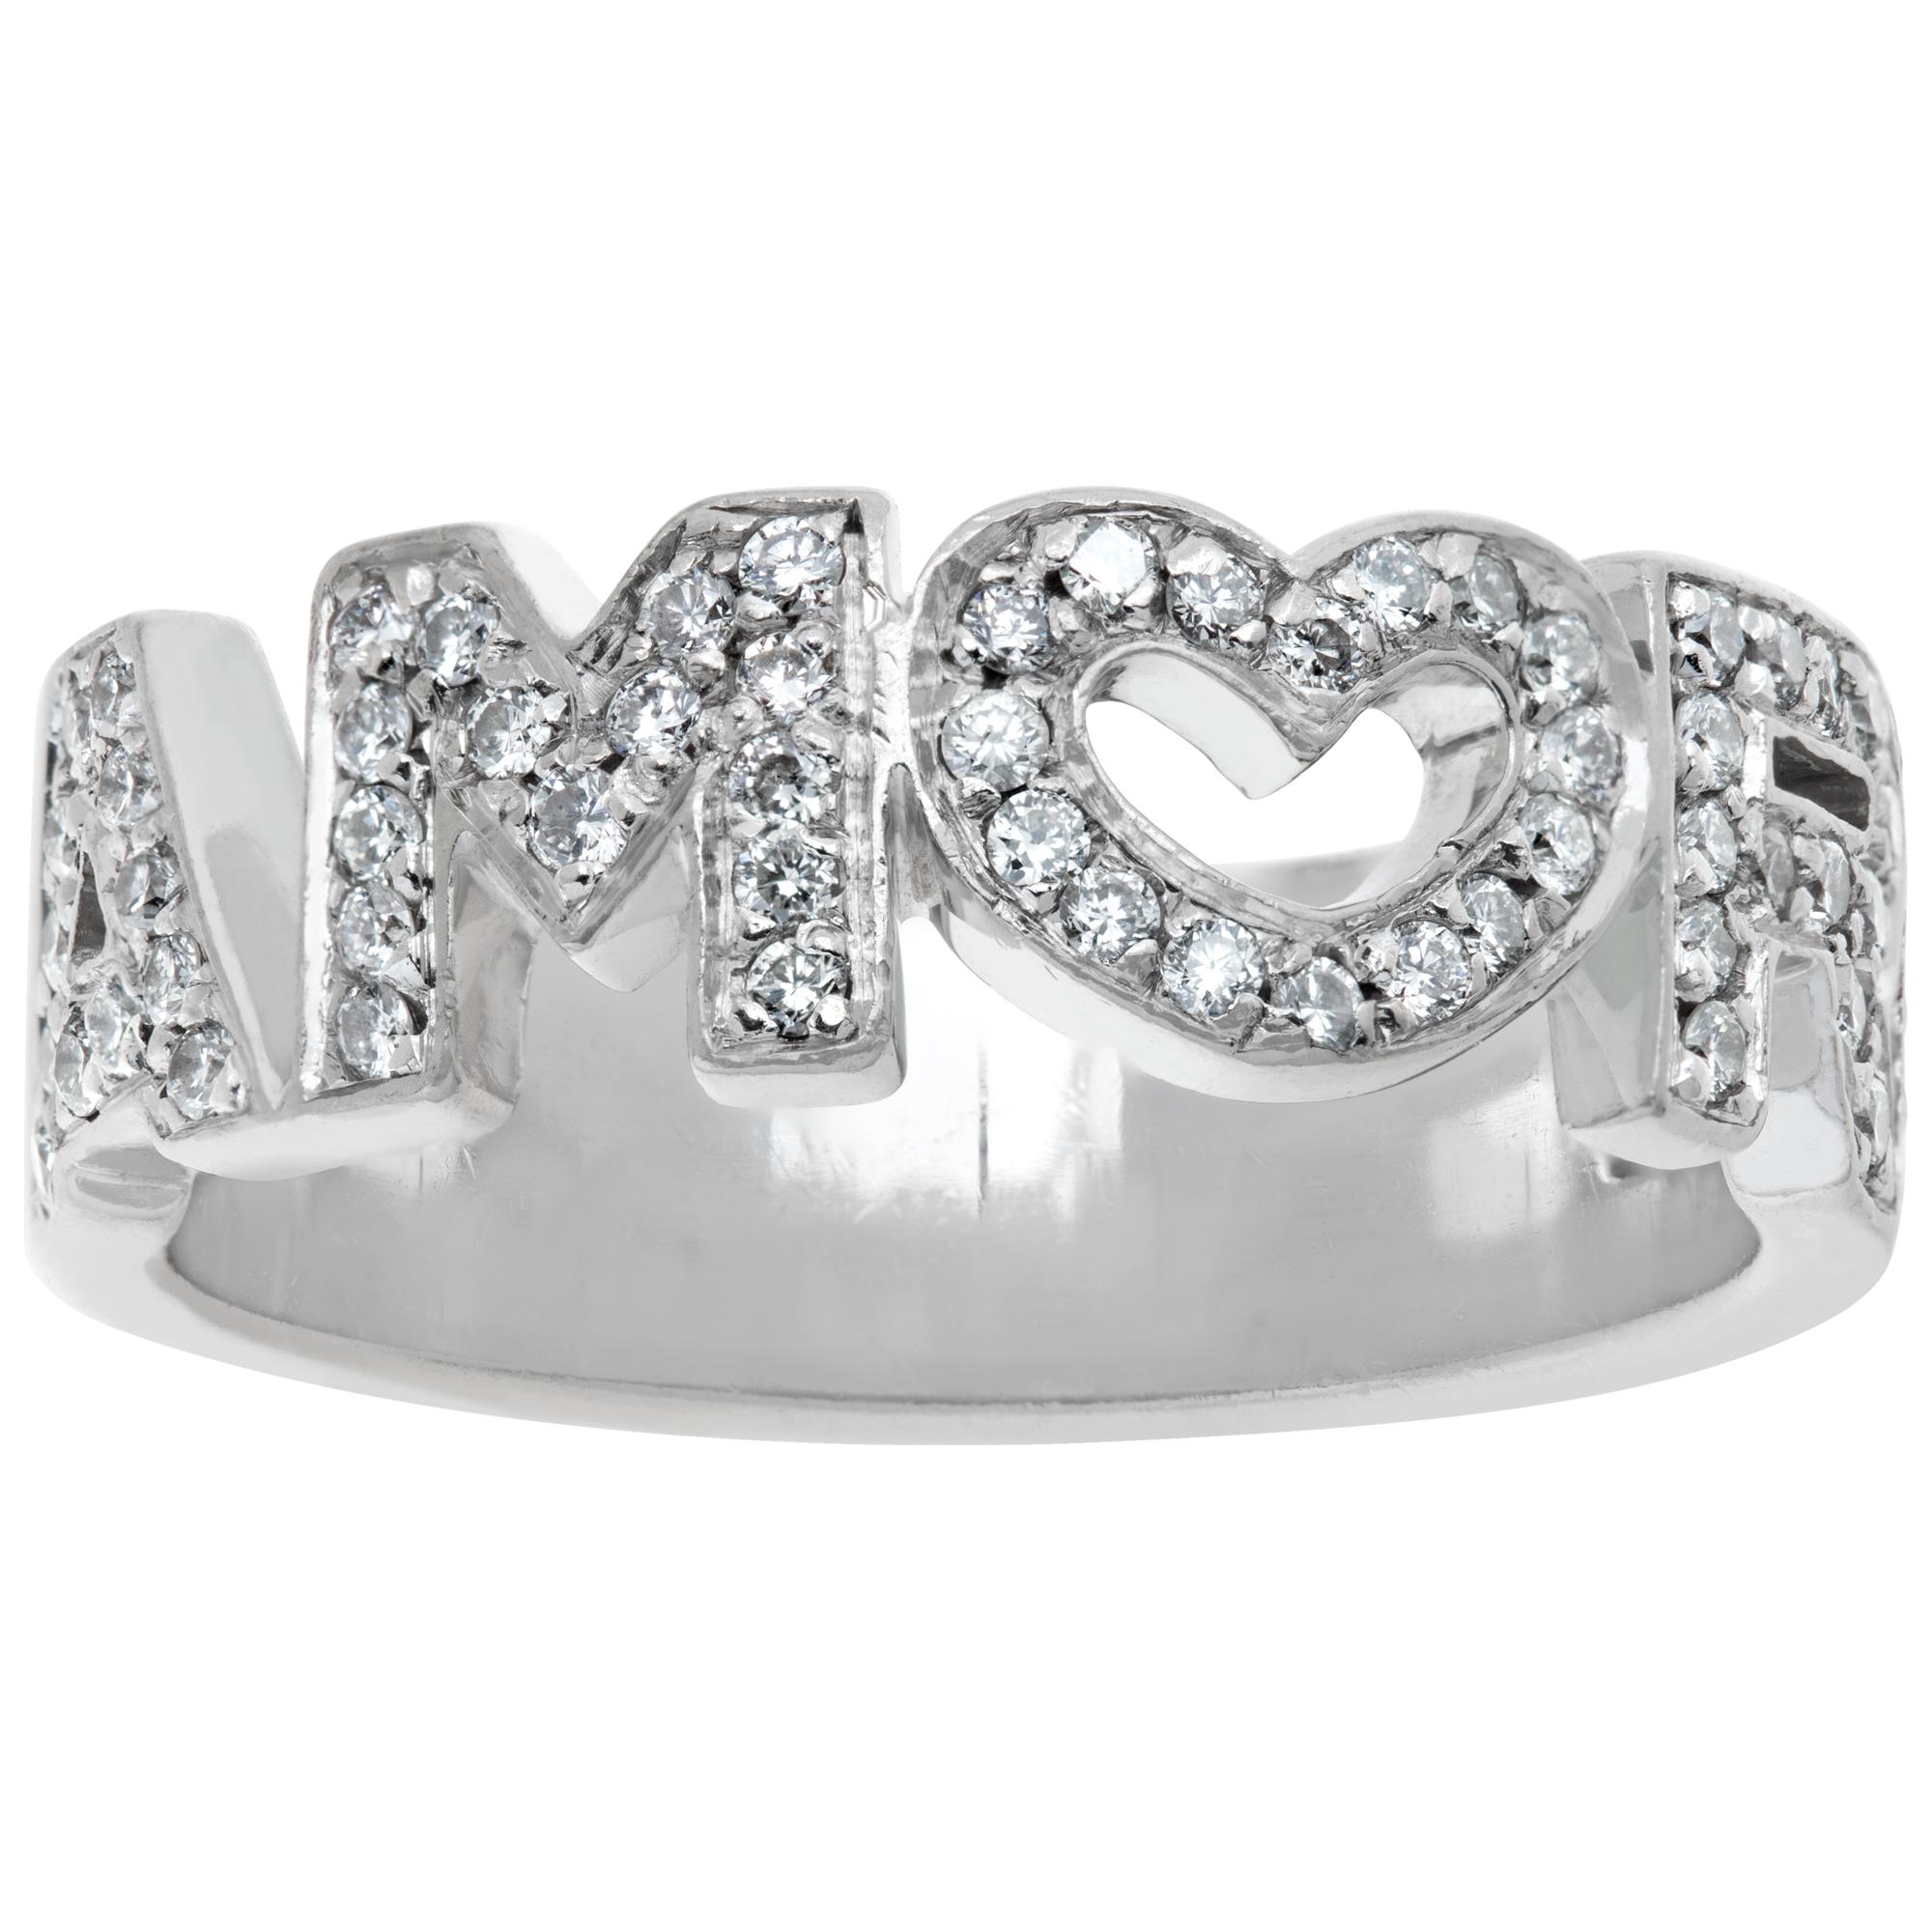 Amore ring in white gold with diamonds. For Sale